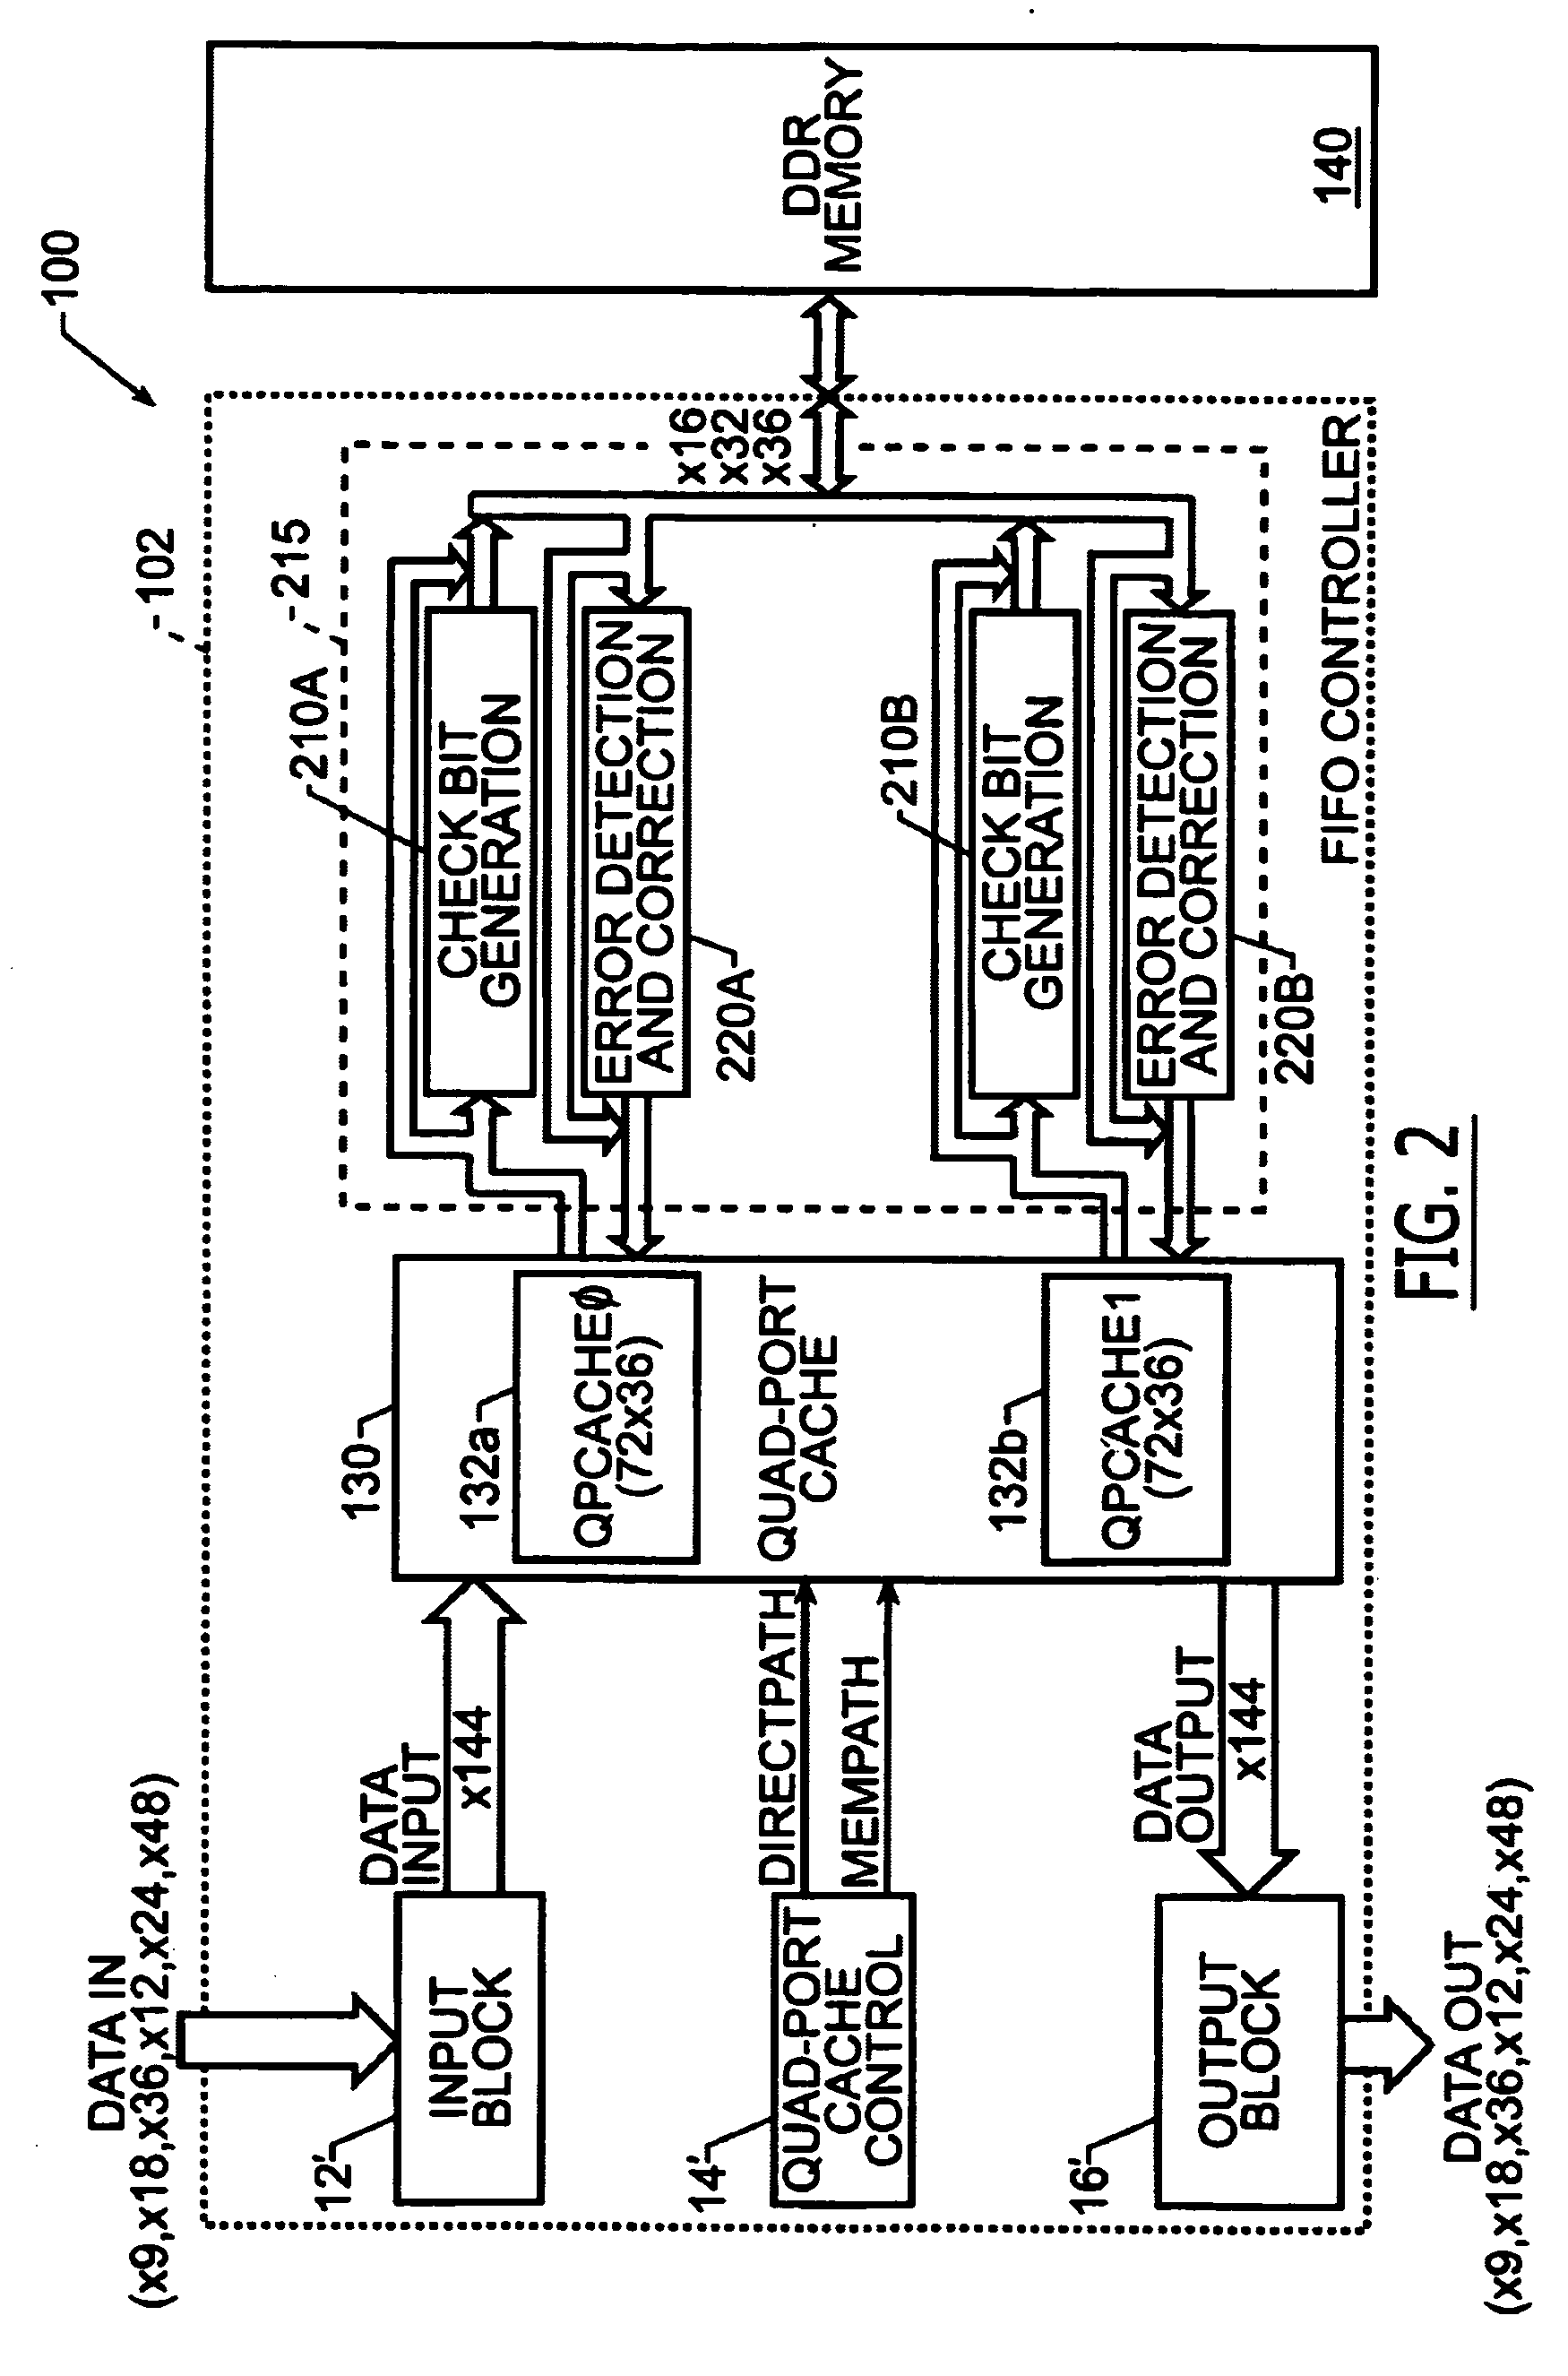 Sequential flow-control and FIFO memory devices that are depth expandable in standard mode operation